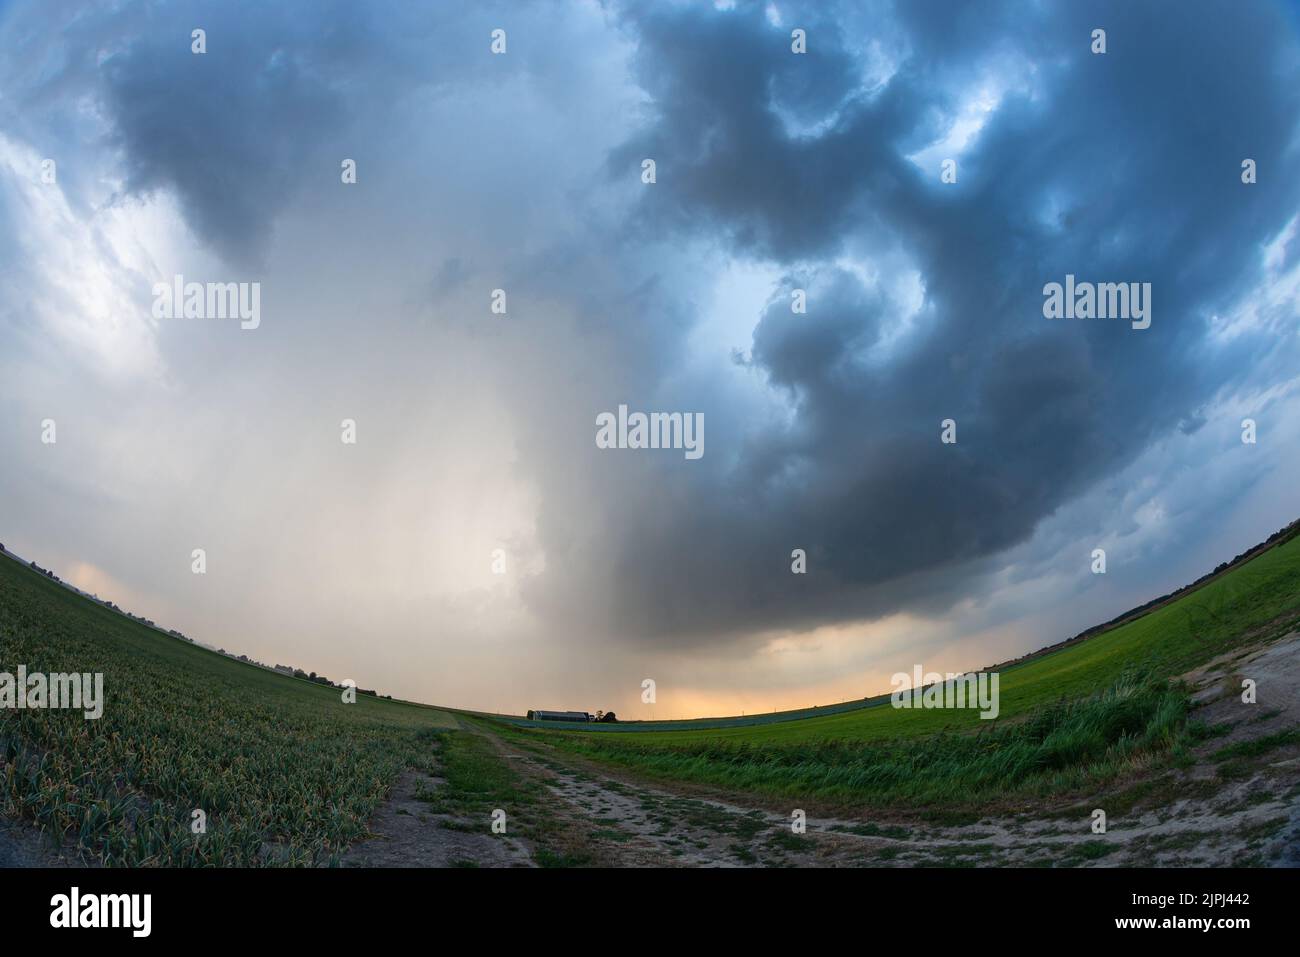 Fisheye view of a dramatic looking thunderstorm over the plains Stock Photo